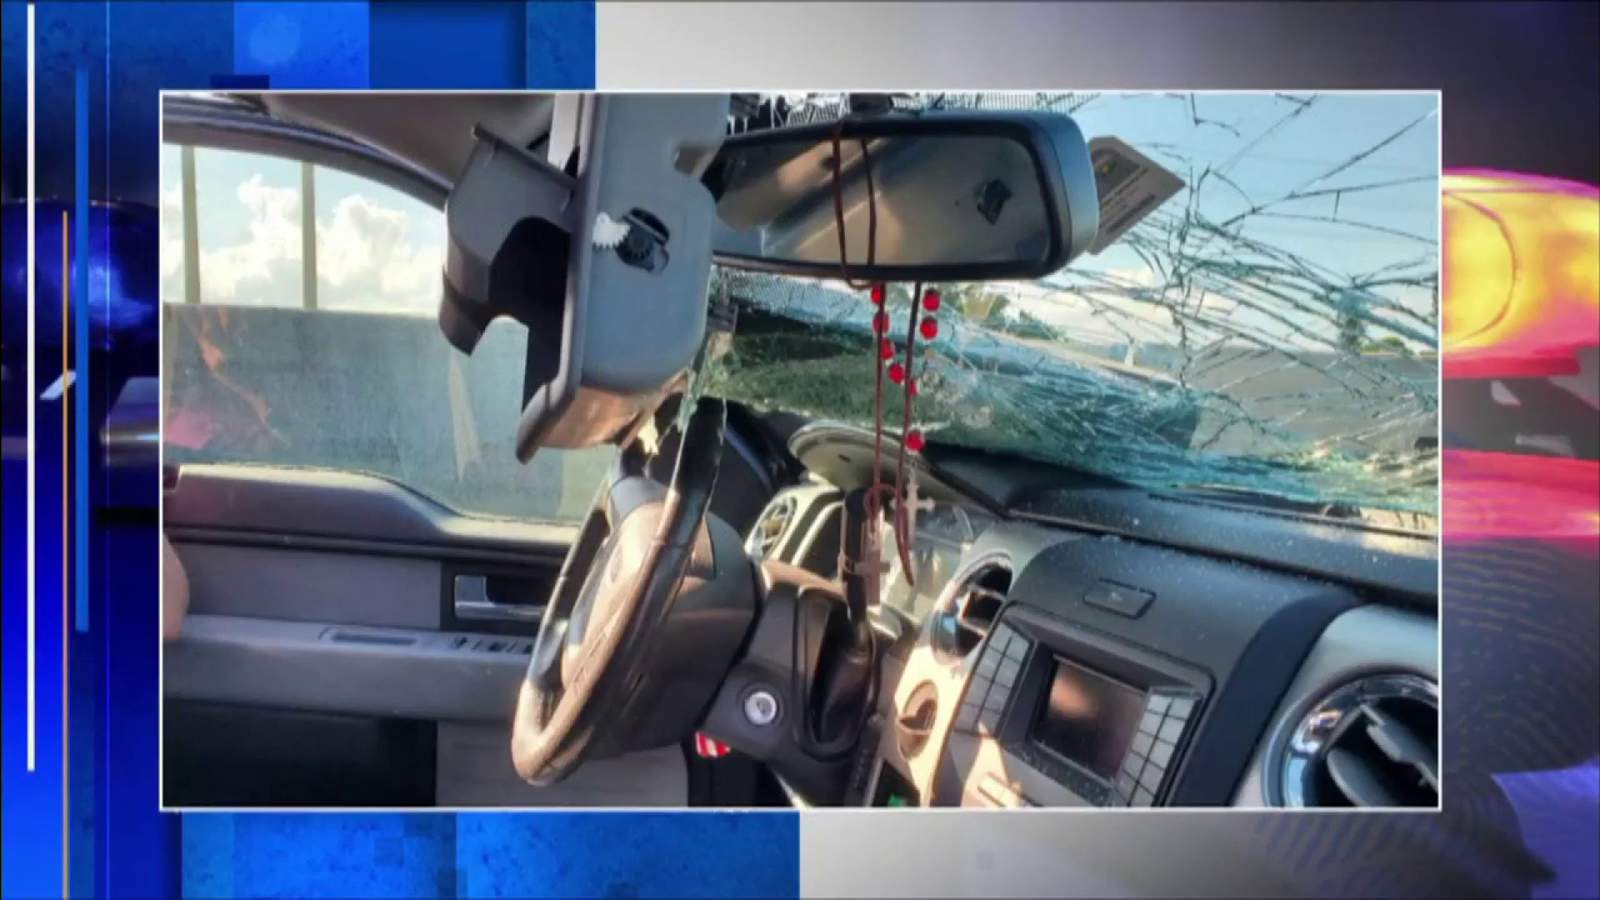 Man lucky to be alive after metal crashes through windshield on I-95